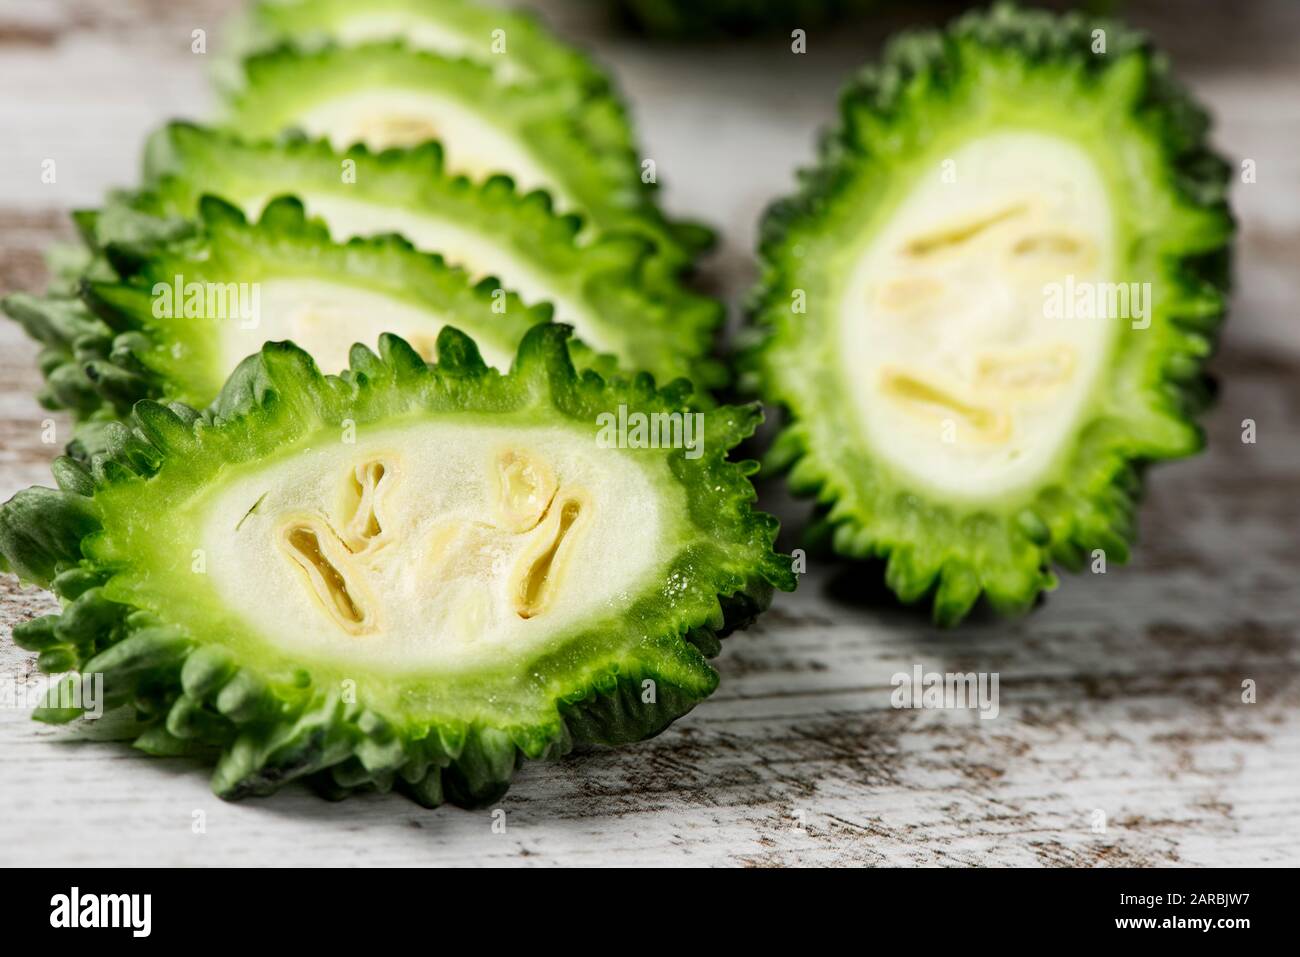 closeup of some slices of raw karela, also known as bitter melon or bitter gourd, on a white rustic wooden table Stock Photo